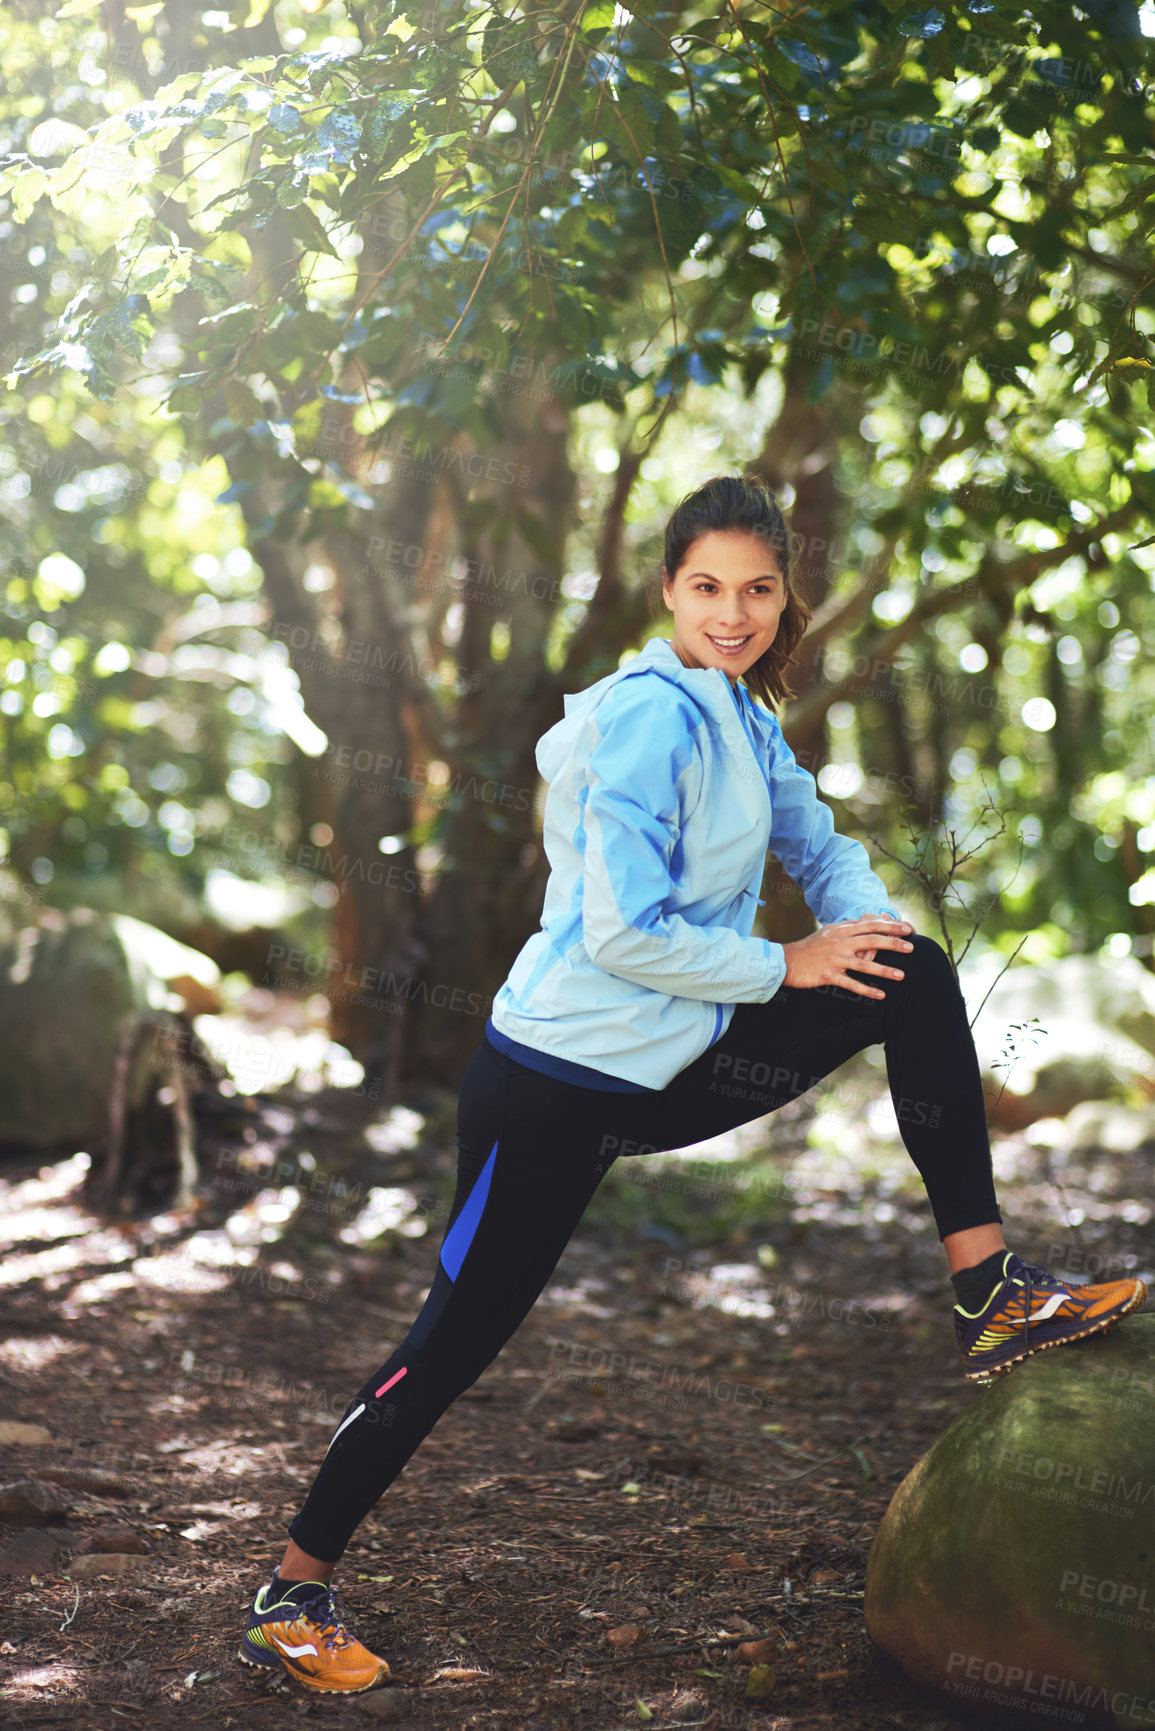 Buy stock photo Shot of a young woman stretching before a trail run